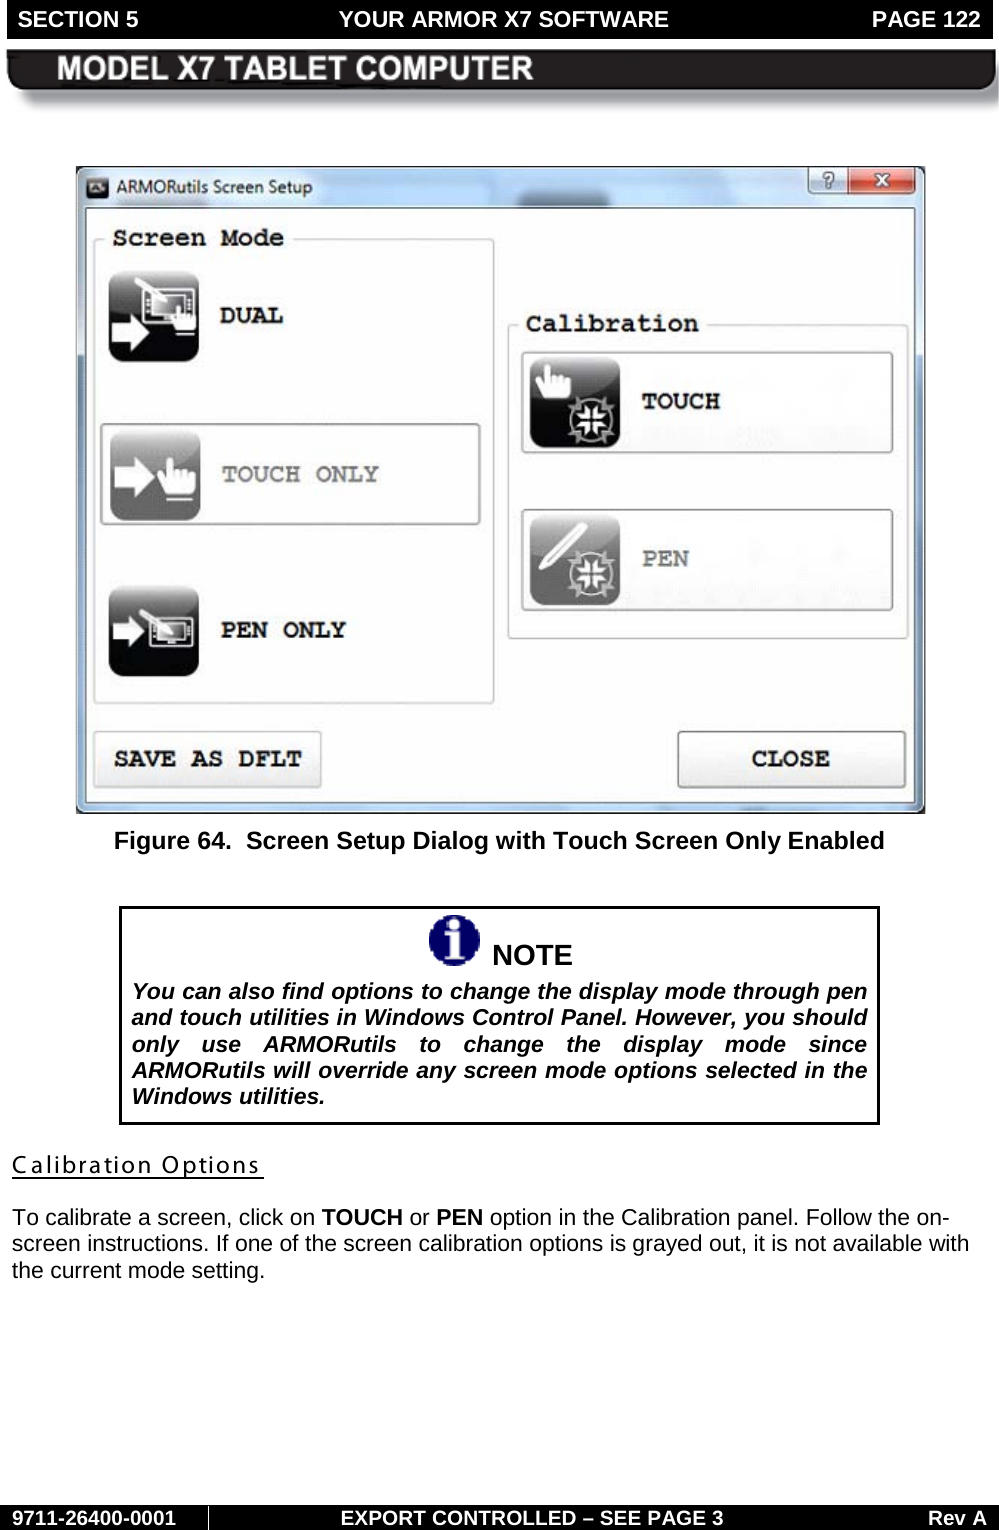 SECTION 5 YOUR ARMOR X7 SOFTWARE  PAGE 122        9711-26400-0001 EXPORT CONTROLLED – SEE PAGE 3 Rev A   Figure 64.  Screen Setup Dialog with Touch Screen Only Enabled    NOTE You can also find options to change the display mode through pen and touch utilities in Windows Control Panel. However, you should only use ARMORutils to change the display mode since ARMORutils will override any screen mode options selected in the Windows utilities. Calibration Options  To calibrate a screen, click on TOUCH or PEN option in the Calibration panel. Follow the on-screen instructions. If one of the screen calibration options is grayed out, it is not available with the current mode setting.   